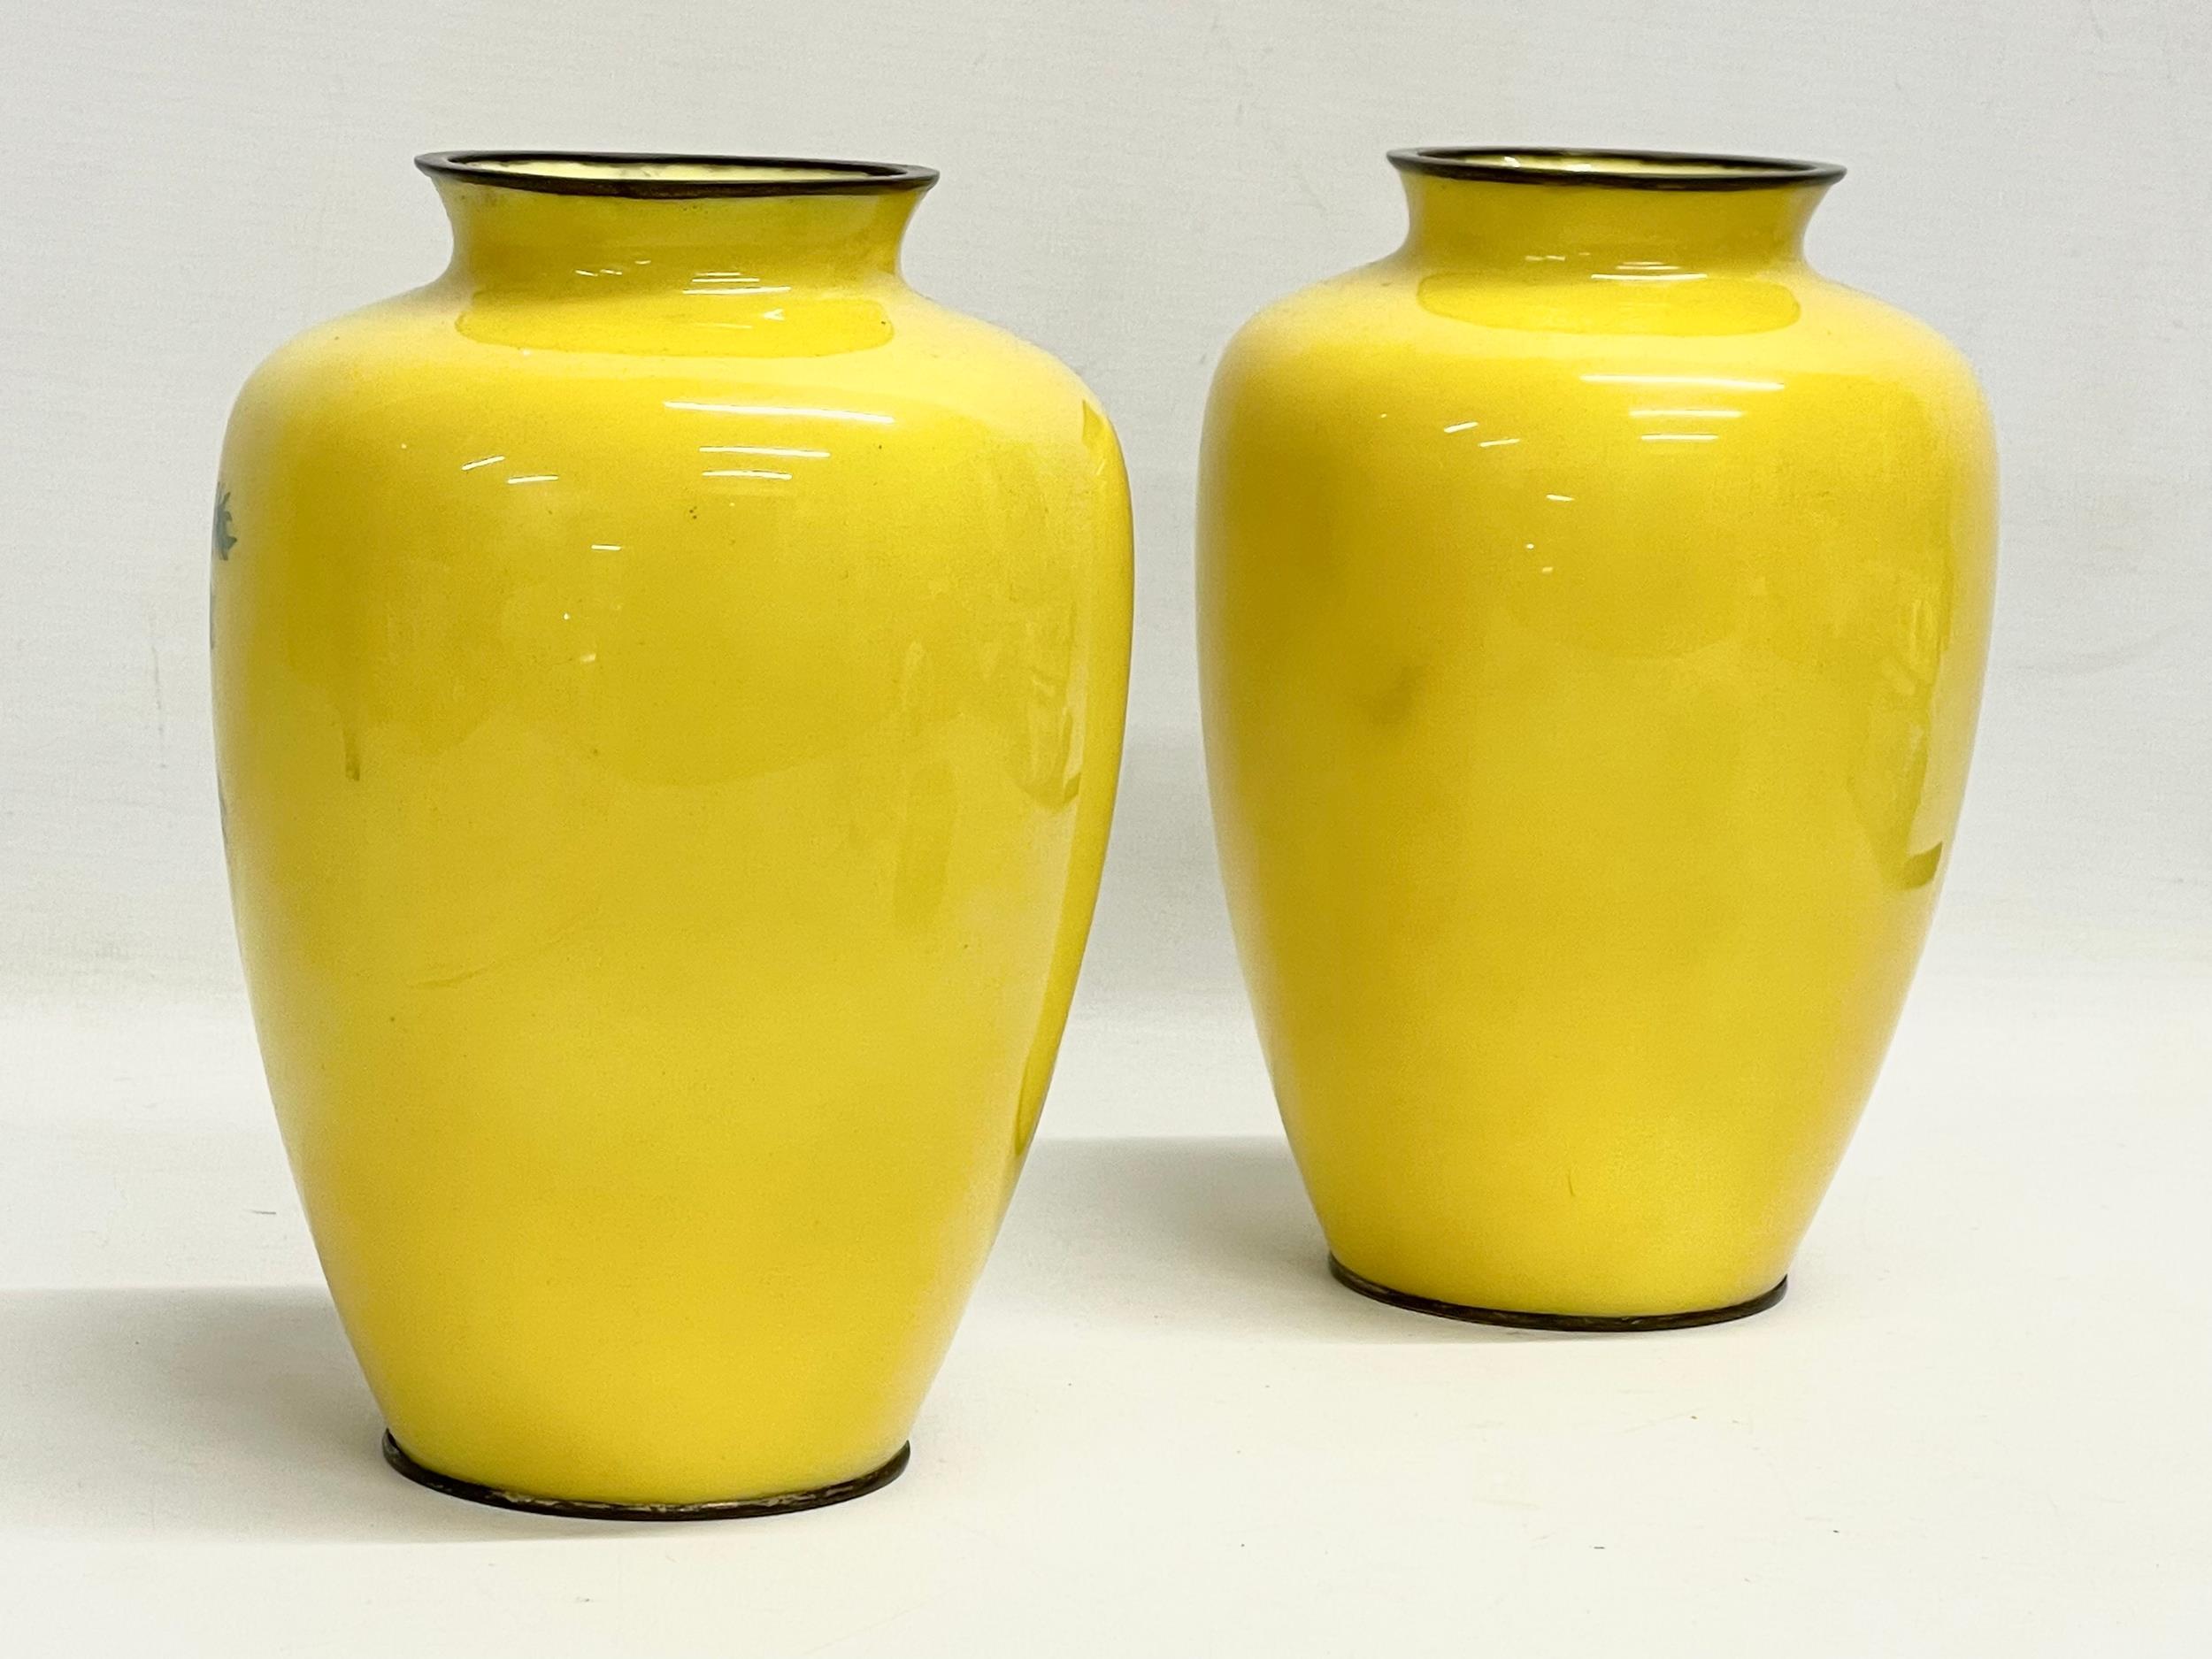 A pair of good quality late 19th century Japanese wireless Cloisonné yellow enamel vases. 13x19cm - Image 4 of 4